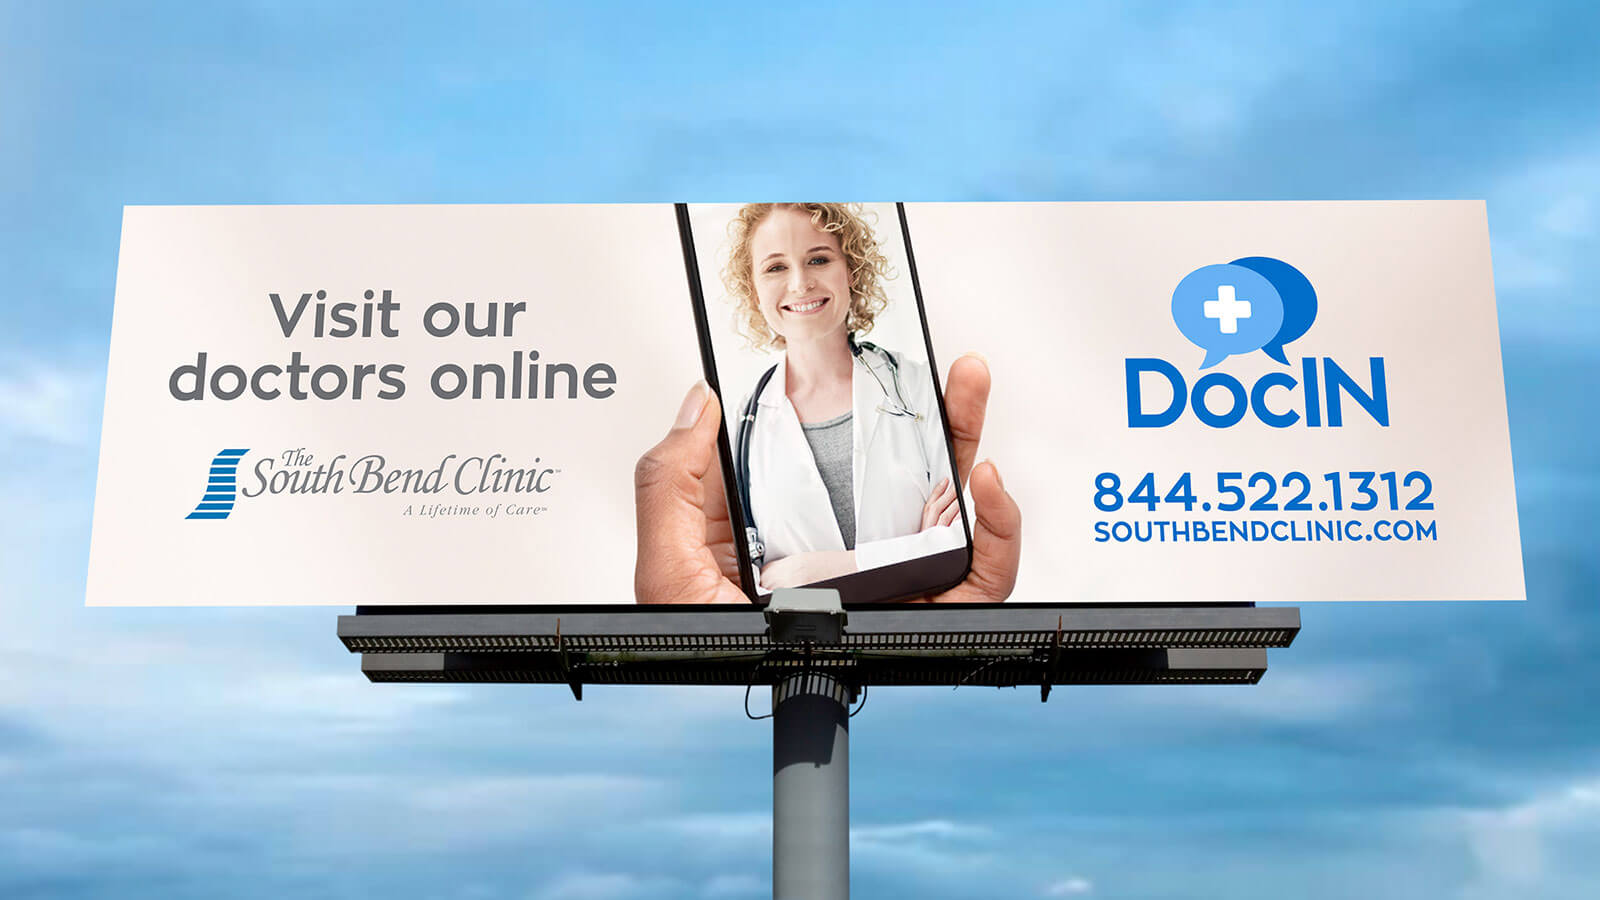 The South Bend Clinic <strong>“DocIN” Online Care Campaign</strong>